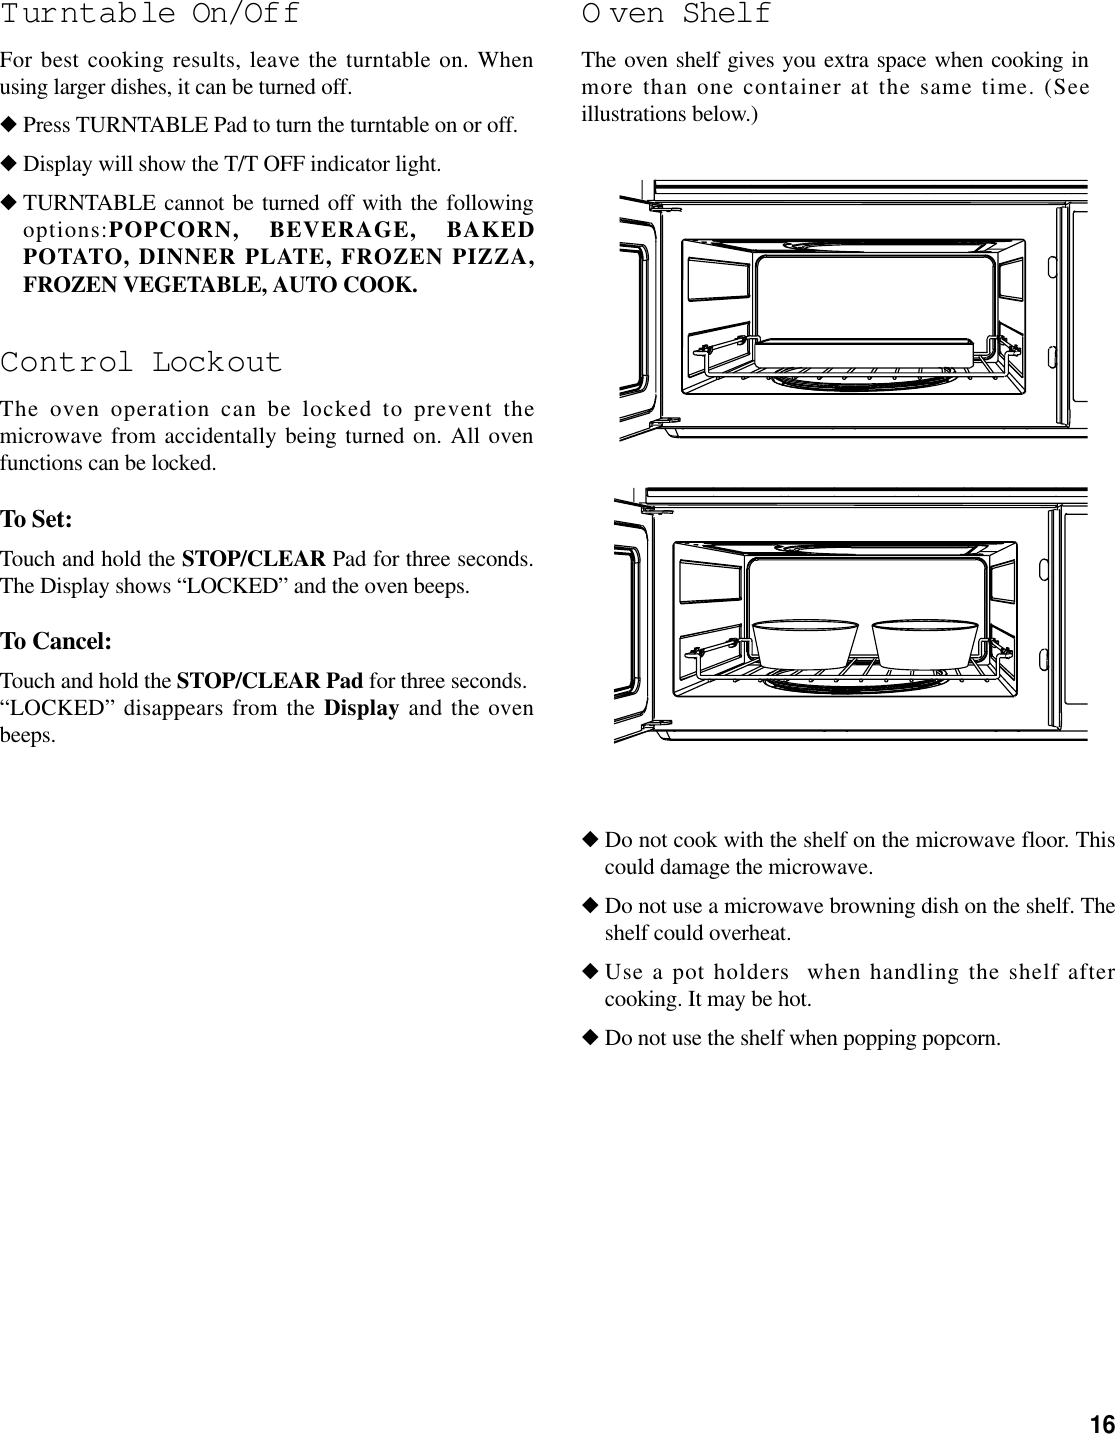 16T urntab le On/OffFor best cooking results, leave the turntable on. Whenusing larger dishes, it can be turned off.◆Press TURNTABLE Pad to turn the turntable on or off.◆Display will show the T/T OFF indicator light.◆TURNTABLE cannot be turned off with the followingoptions:POPCORN, BEVERAGE, BAKEDPOTATO, DINNER PLATE, FROZEN PIZZA,FROZEN VEGETABLE, AUTO COOK.Control LockoutThe oven operation can be locked to prevent themicrowave from accidentally being turned on. All ovenfunctions can be locked.To Set:Touch and hold the STOP/CLEAR Pad for three seconds.The Display shows “LOCKED” and the oven beeps.To Cancel:Touch and hold the STOP/CLEAR Pad for three seconds. “LOCKED” disappears from the Display and the ovenbeeps.O ven ShelfThe oven shelf gives you extra space when cooking inmore than one container at the same time. (Seeillustrations below.)◆Do not cook with the shelf on the microwave floor. Thiscould damage the microwave.◆Do not use a microwave browning dish on the shelf. Theshelf could overheat.◆Use a pot holders  when handling the shelf aftercooking. It may be hot.◆Do not use the shelf when popping popcorn.